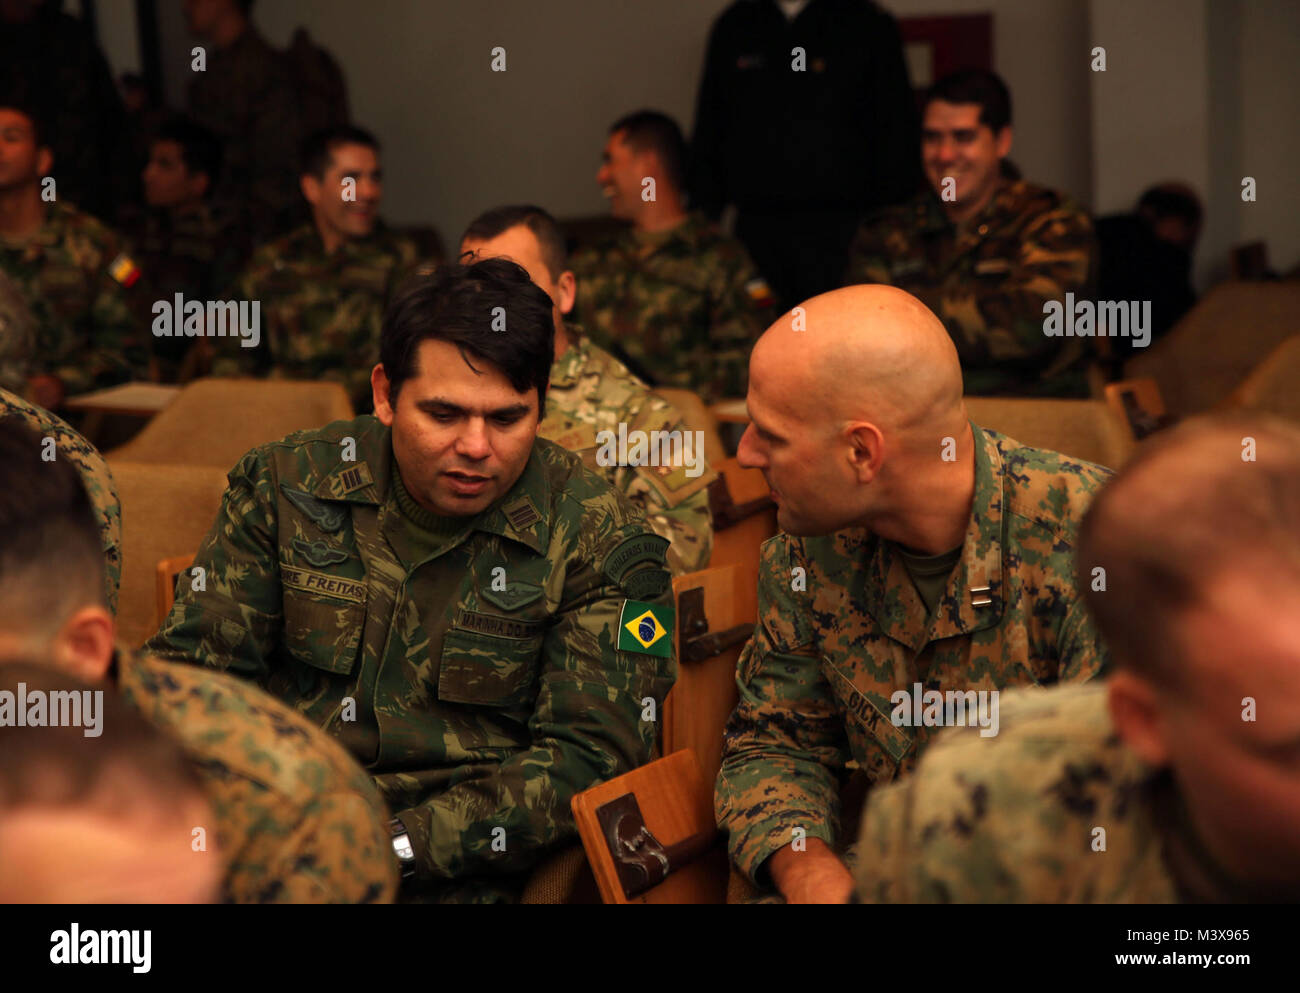 Brazilian Lt. Col. André Freitas, of the amphibious division command, has friendly conversation with U.S. Marine Capt. Timothy Gick, an intelligence officer with 1st Division, 23rd Marines, before they receive a brief explaining the Marine Corps Planning Process given by Expeditionary Warfare Training Group Atlantic at the Chilean Naval Training Center in Valparaiso, Chile, during the Partnership of the Americas exercise August 13, 2014. The training explains the process that the U.S. military follows for amphibious operations, which will be demonstrated in a final exercise. POA 14 is designed Stock Photo